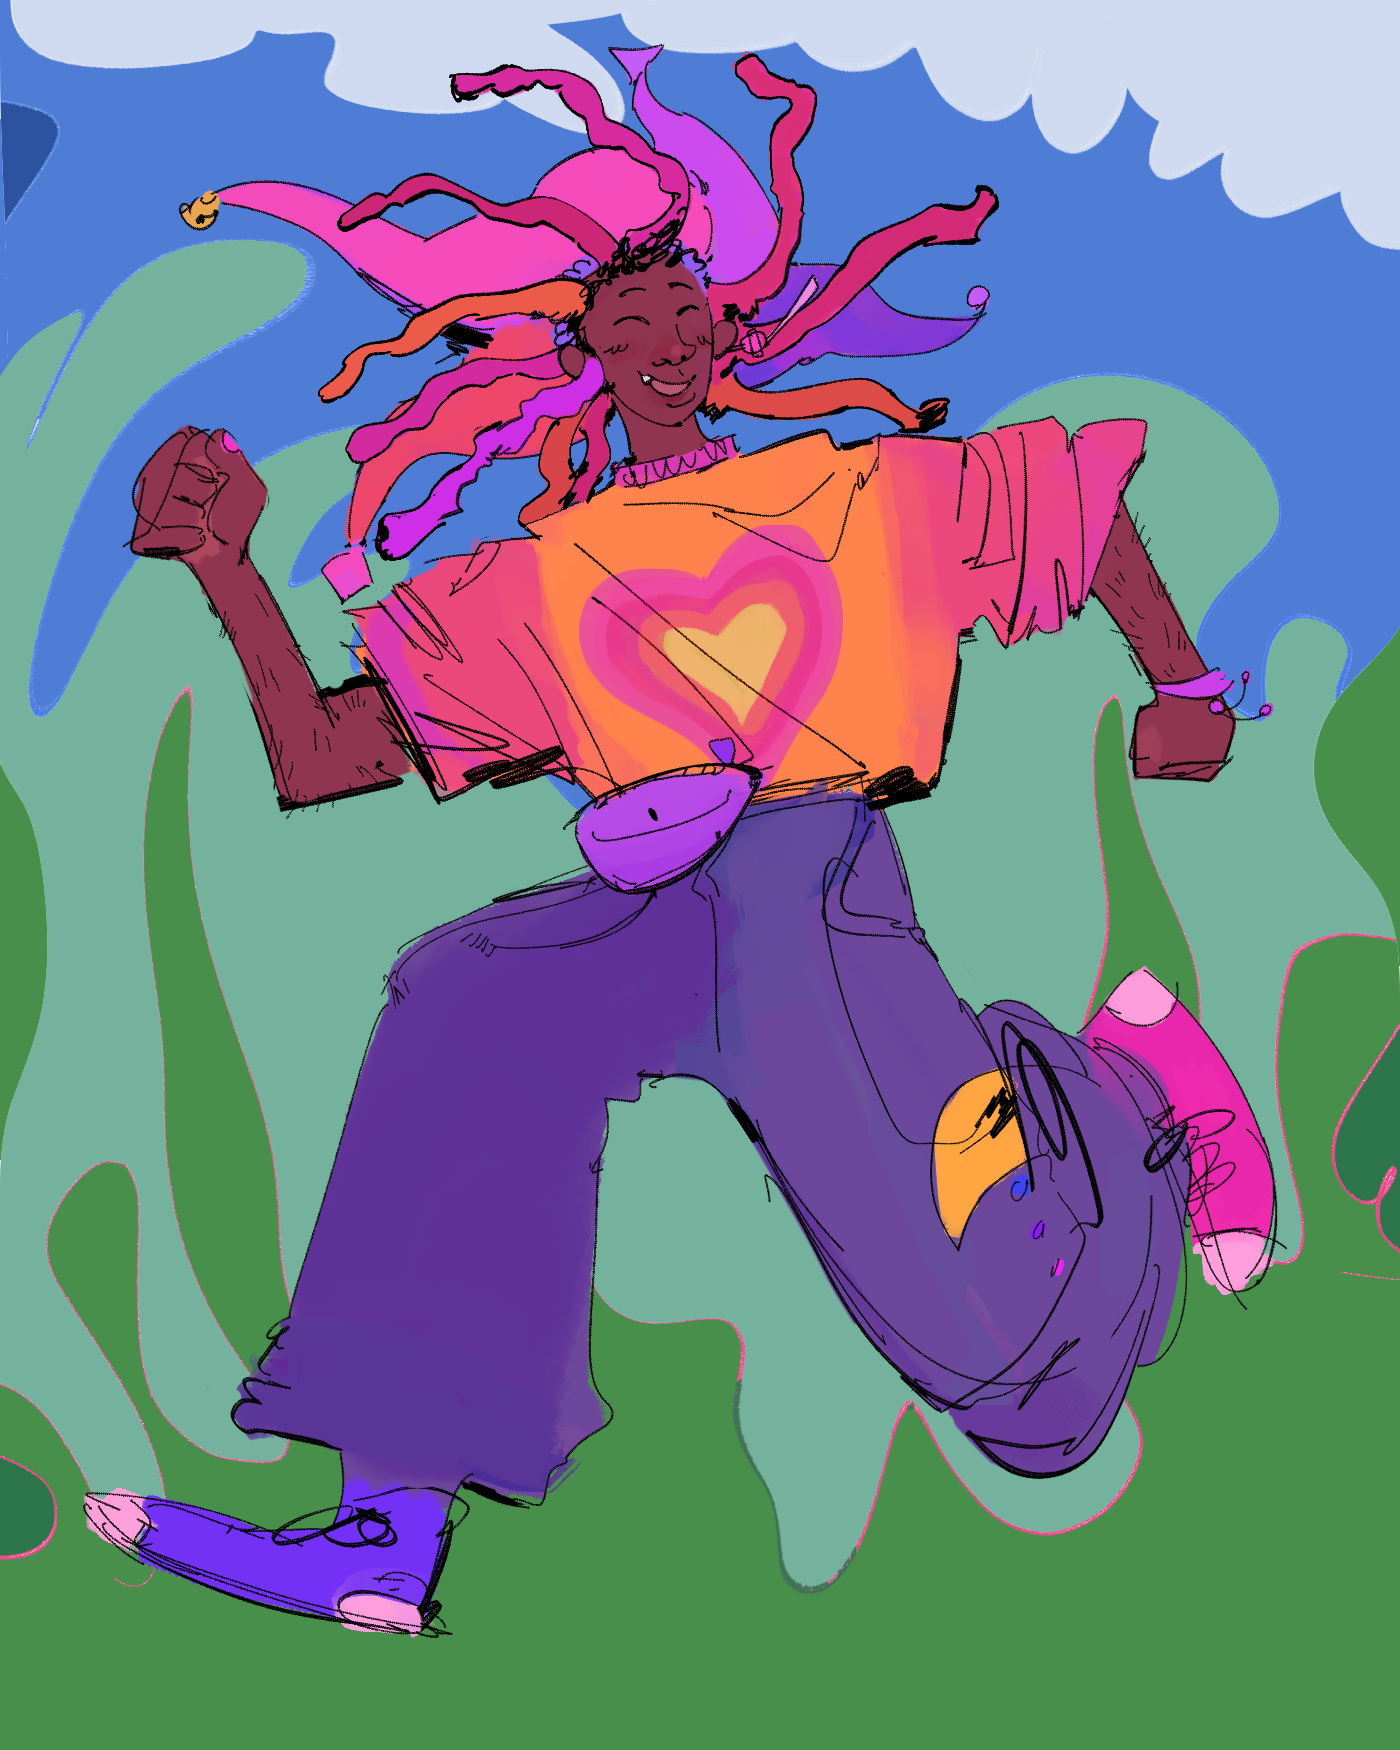 a jester-inspired character running across a colorful, and funky background. Their jester-hat is made up of bright purples and pinks--and their bells are different shapes. Their shirt is orange with pink sleaves, with a pink and orange heart in the middle. Their pants are a soft blue color, adorned with the iconic pacman character chasing after three ghosts. Their shoes are different colors--the left facing shoe is blue, while the other is a bright pink.